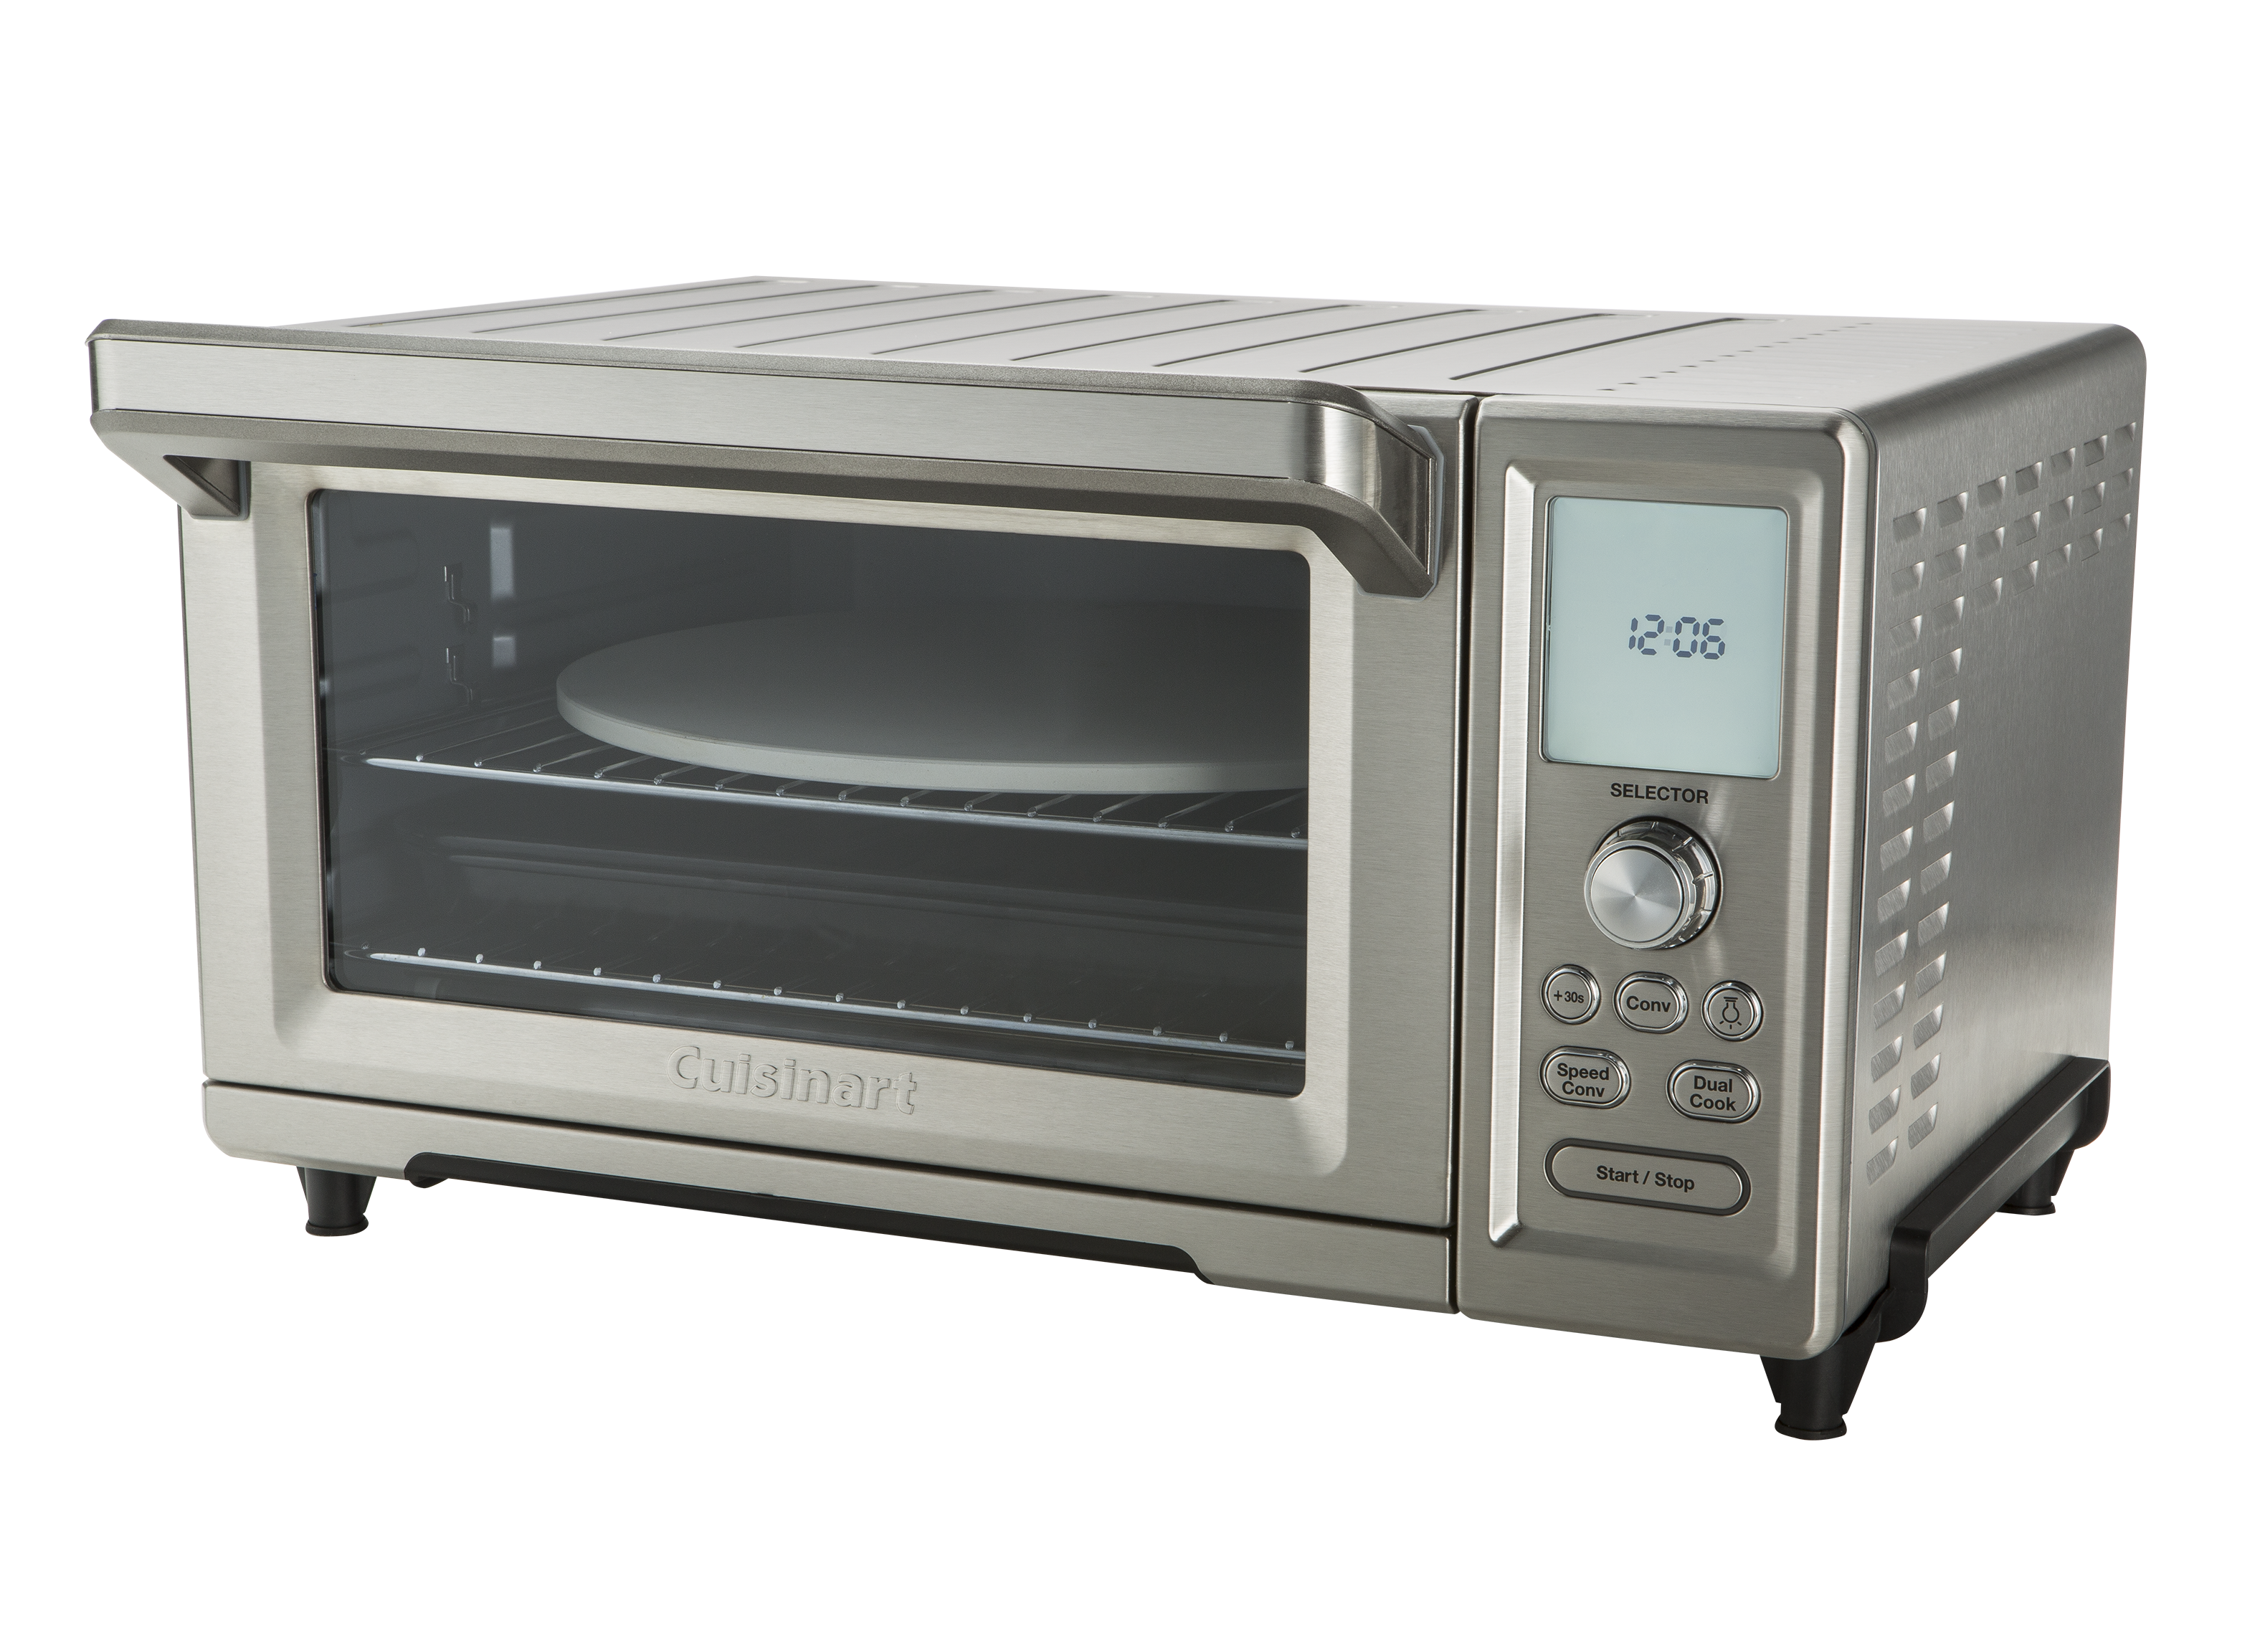 https://crdms.images.consumerreports.org/prod/products/cr/models/387679-toasterovens-cuisinart-chefstoasterconvectiontob260n.png